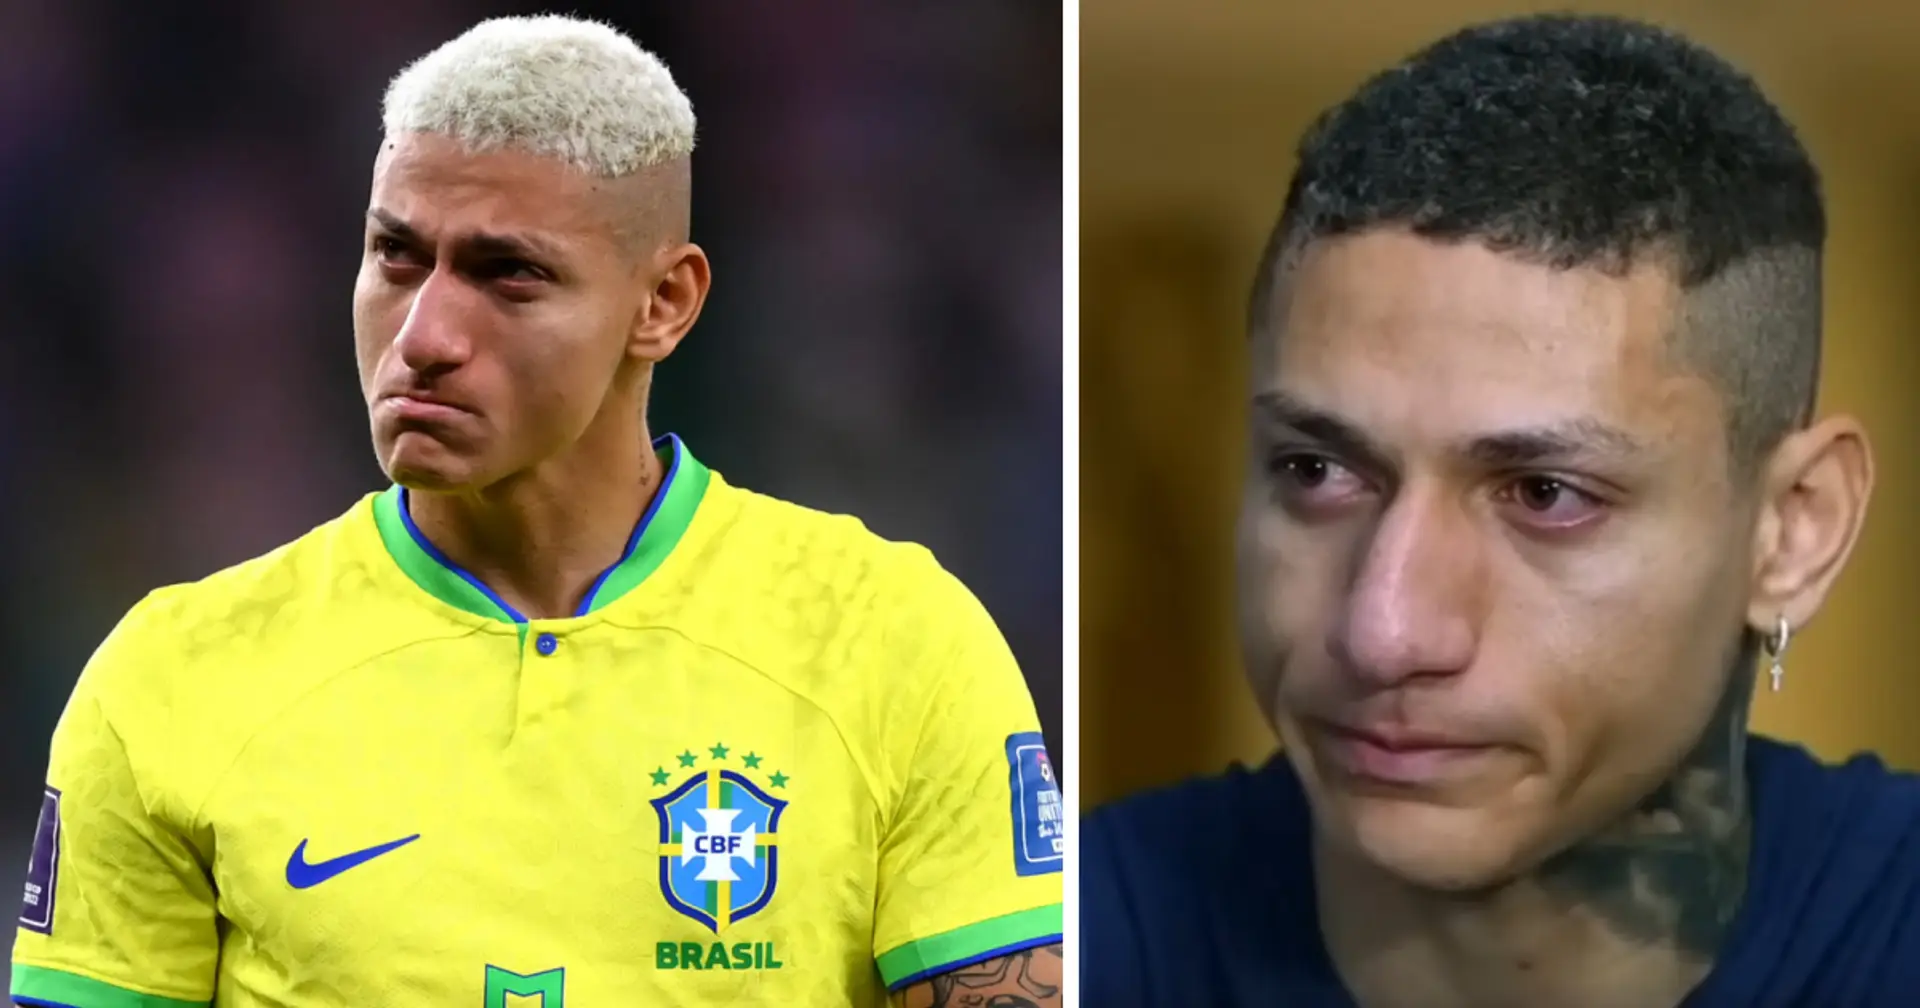 'I wanted to give up': Richarlison shares his struggle with depression and dark thoughts about death